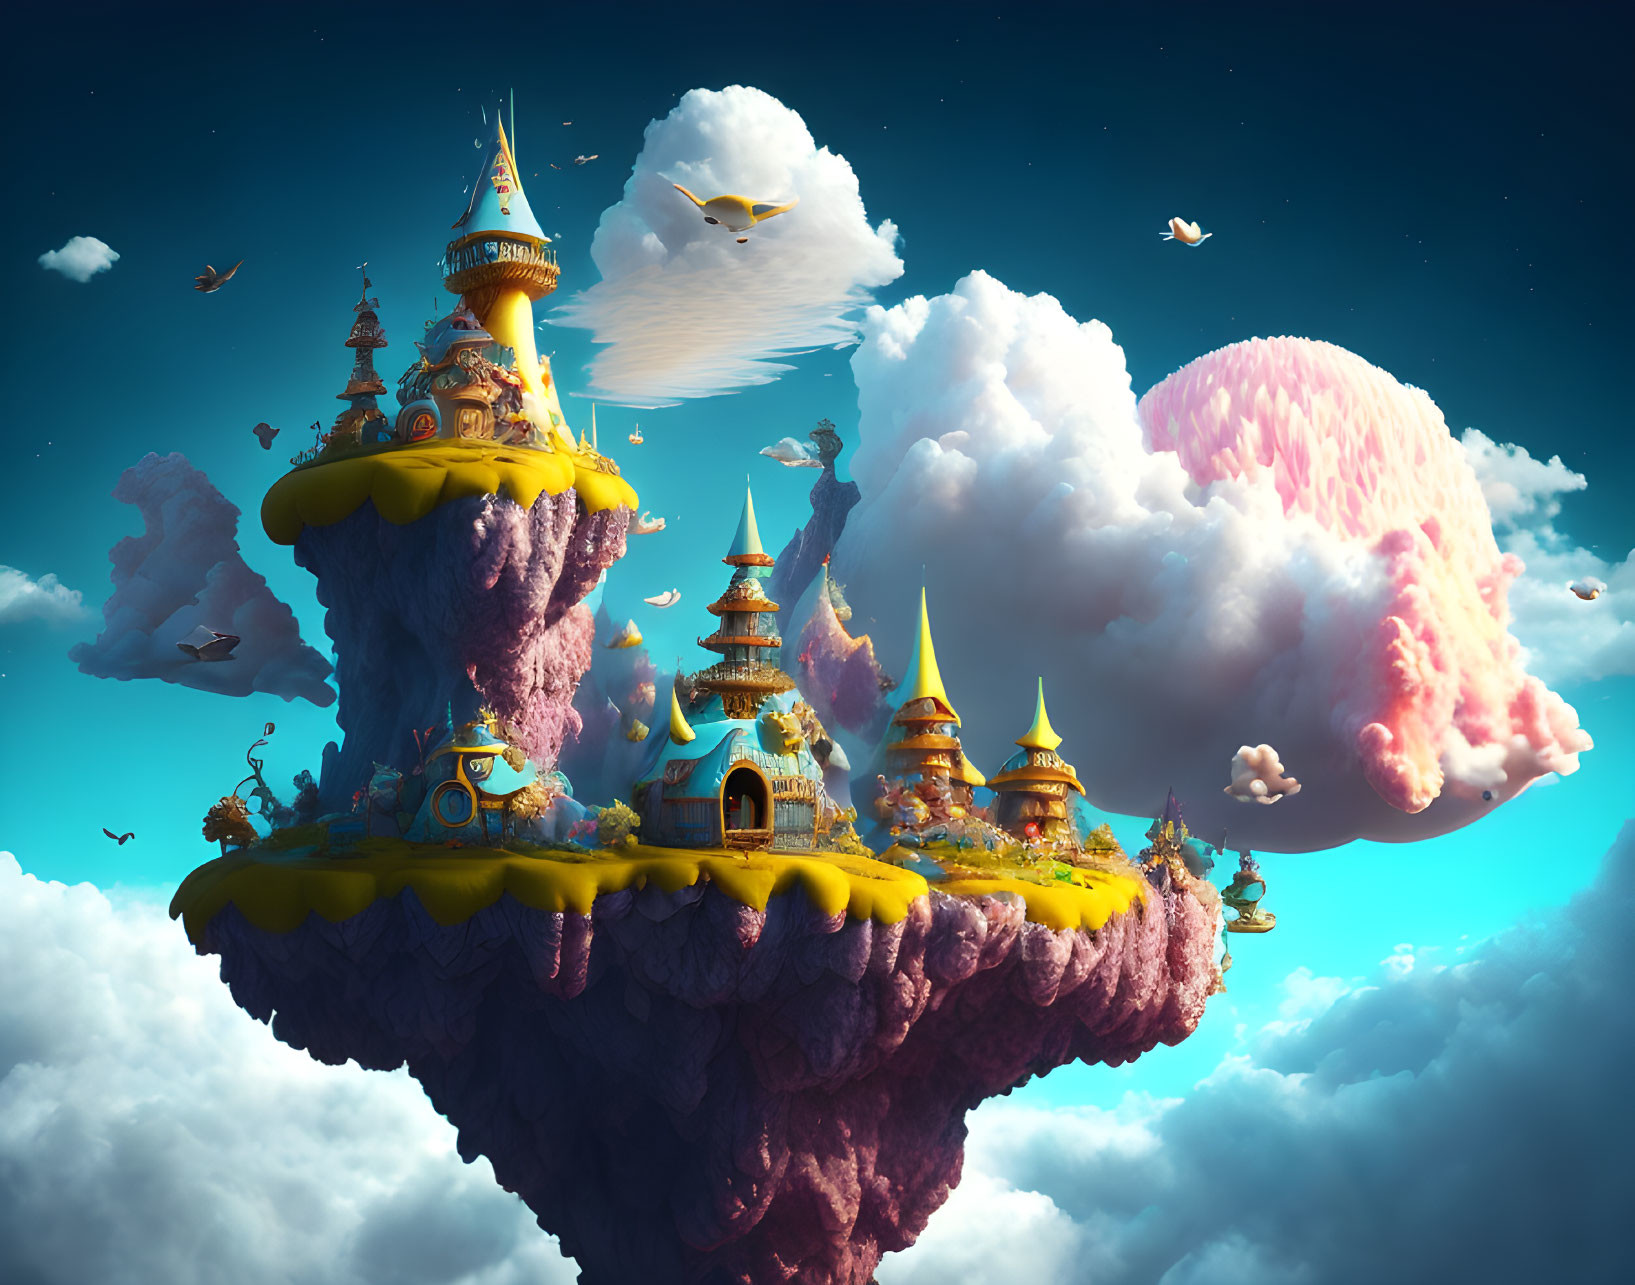 Whimsical floating islands with castles under a blue sky